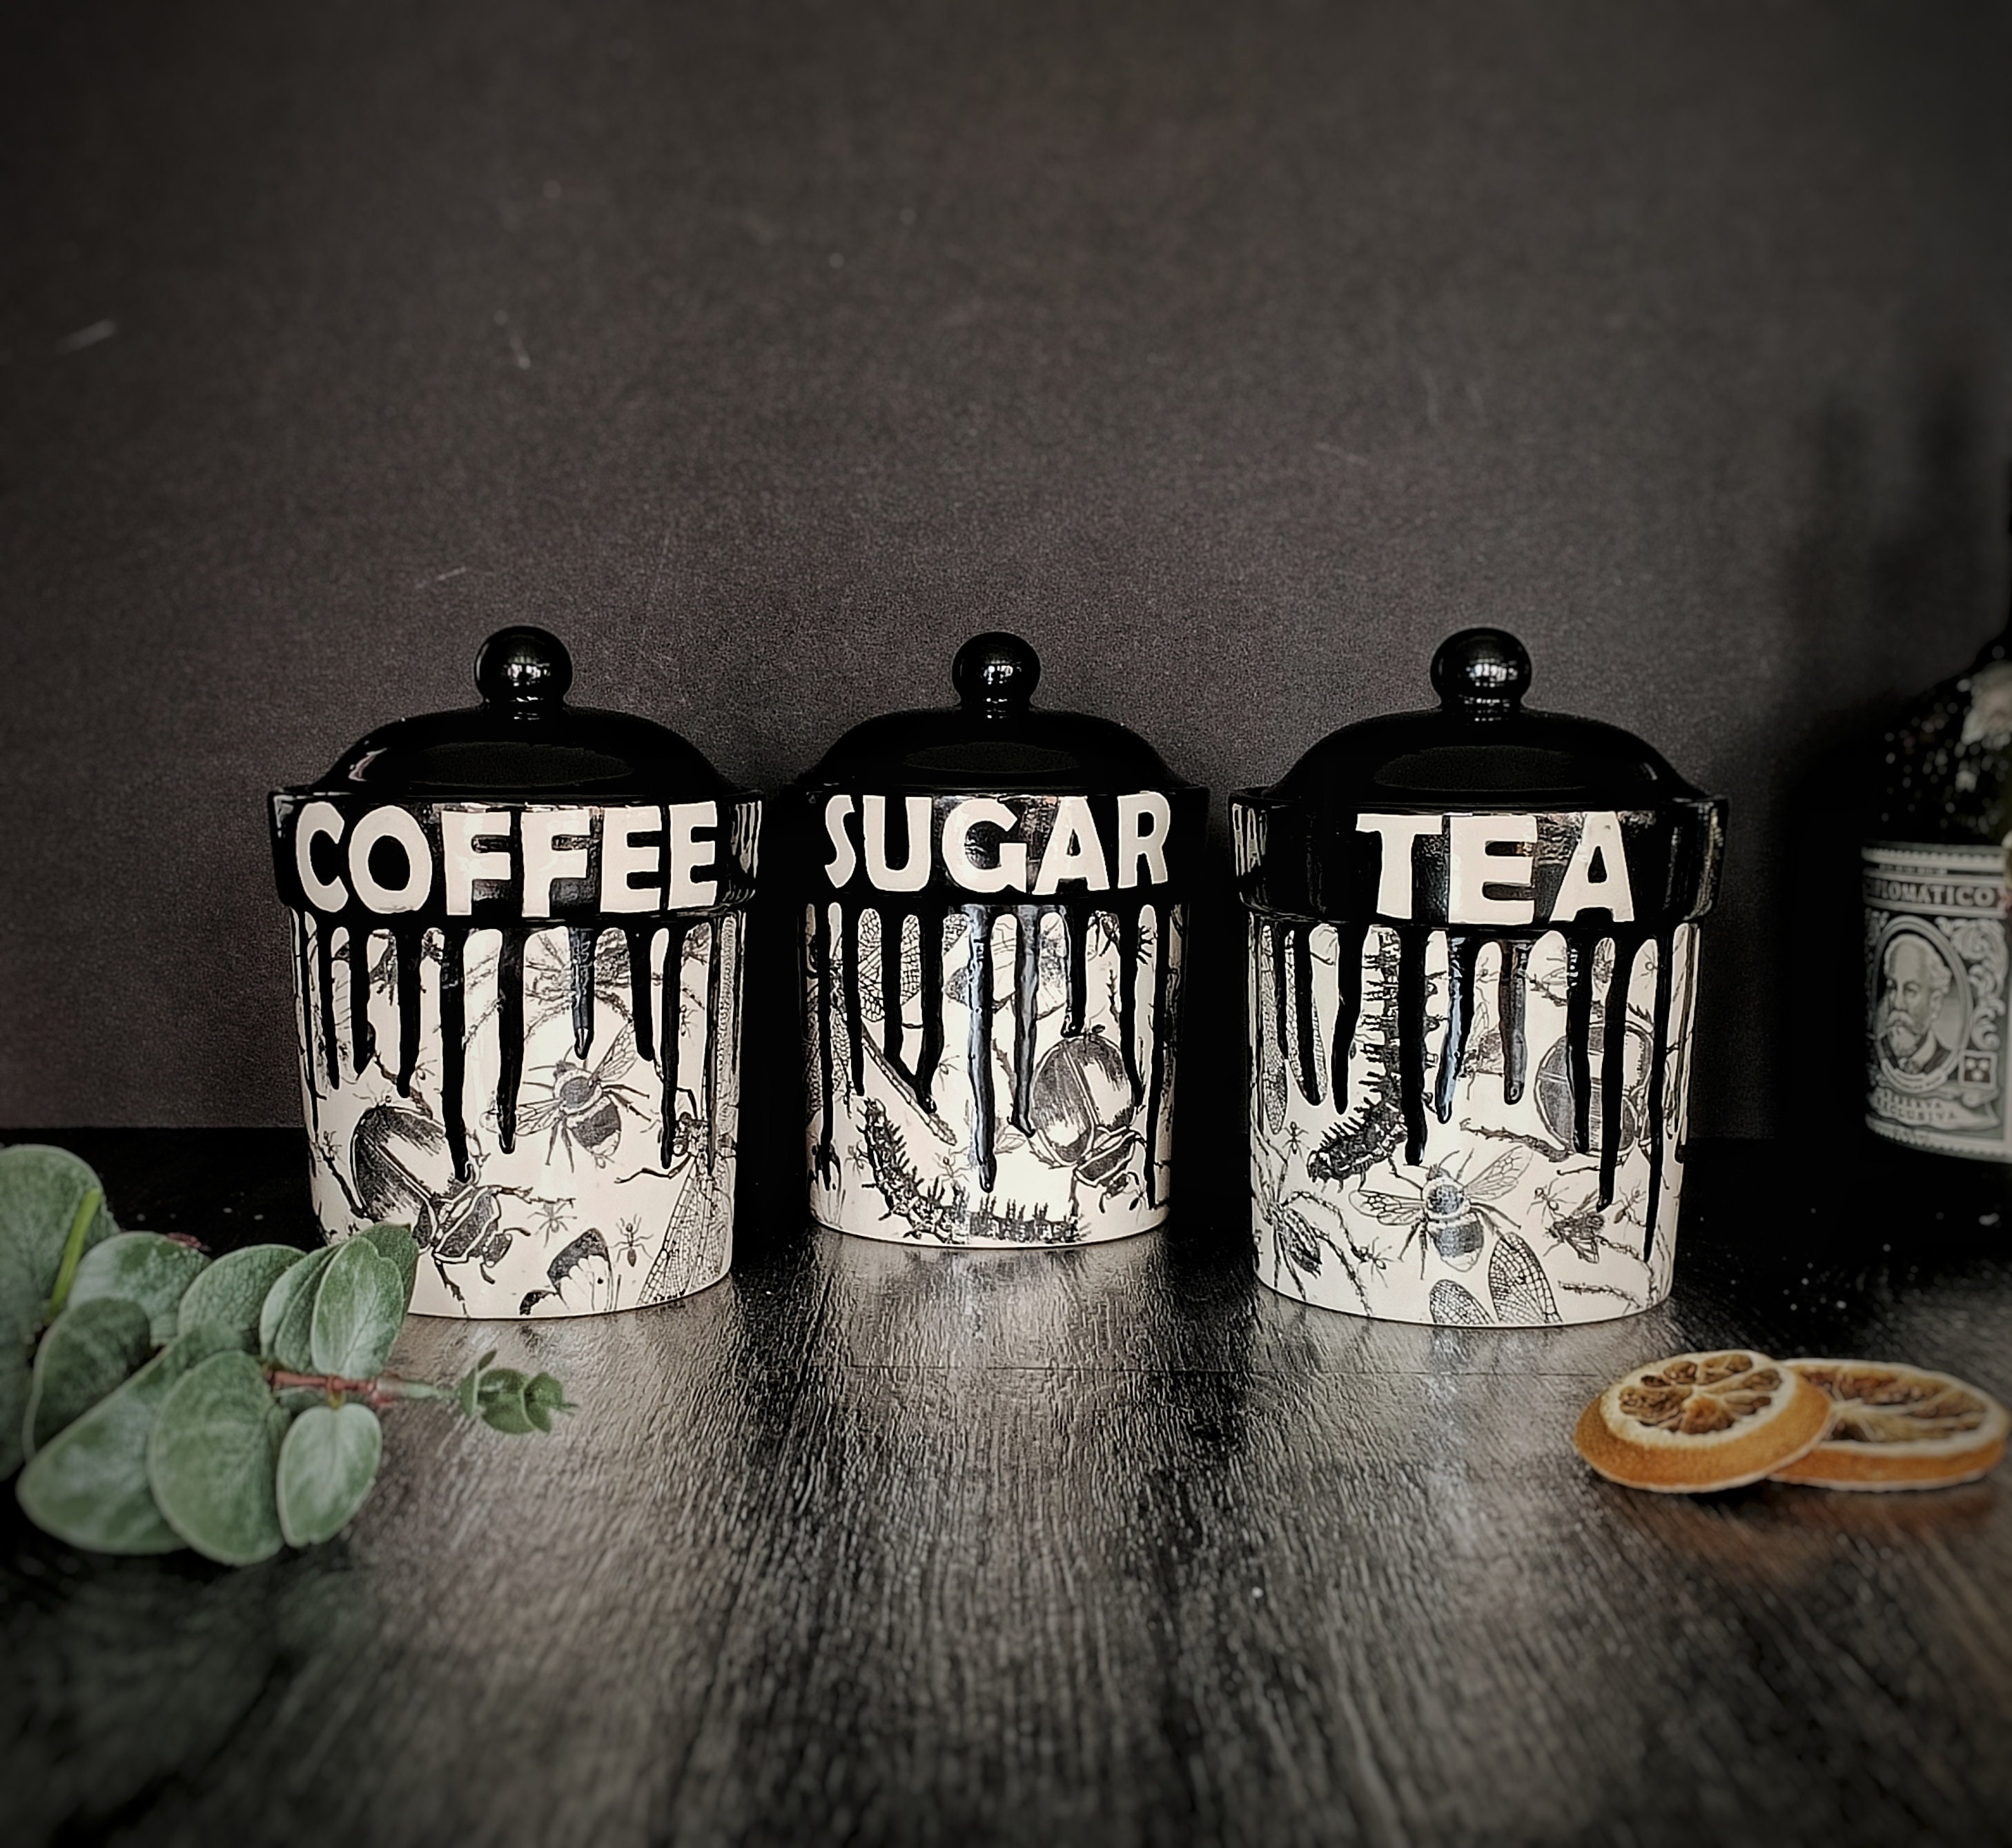 Skull Storage Canisters, Tea Coffee Canister, Sugar Jars, Storage Pots,  Ceramic Pot, Container, Kitchen Flour Pot, Hand Painted, Gothic Goth 